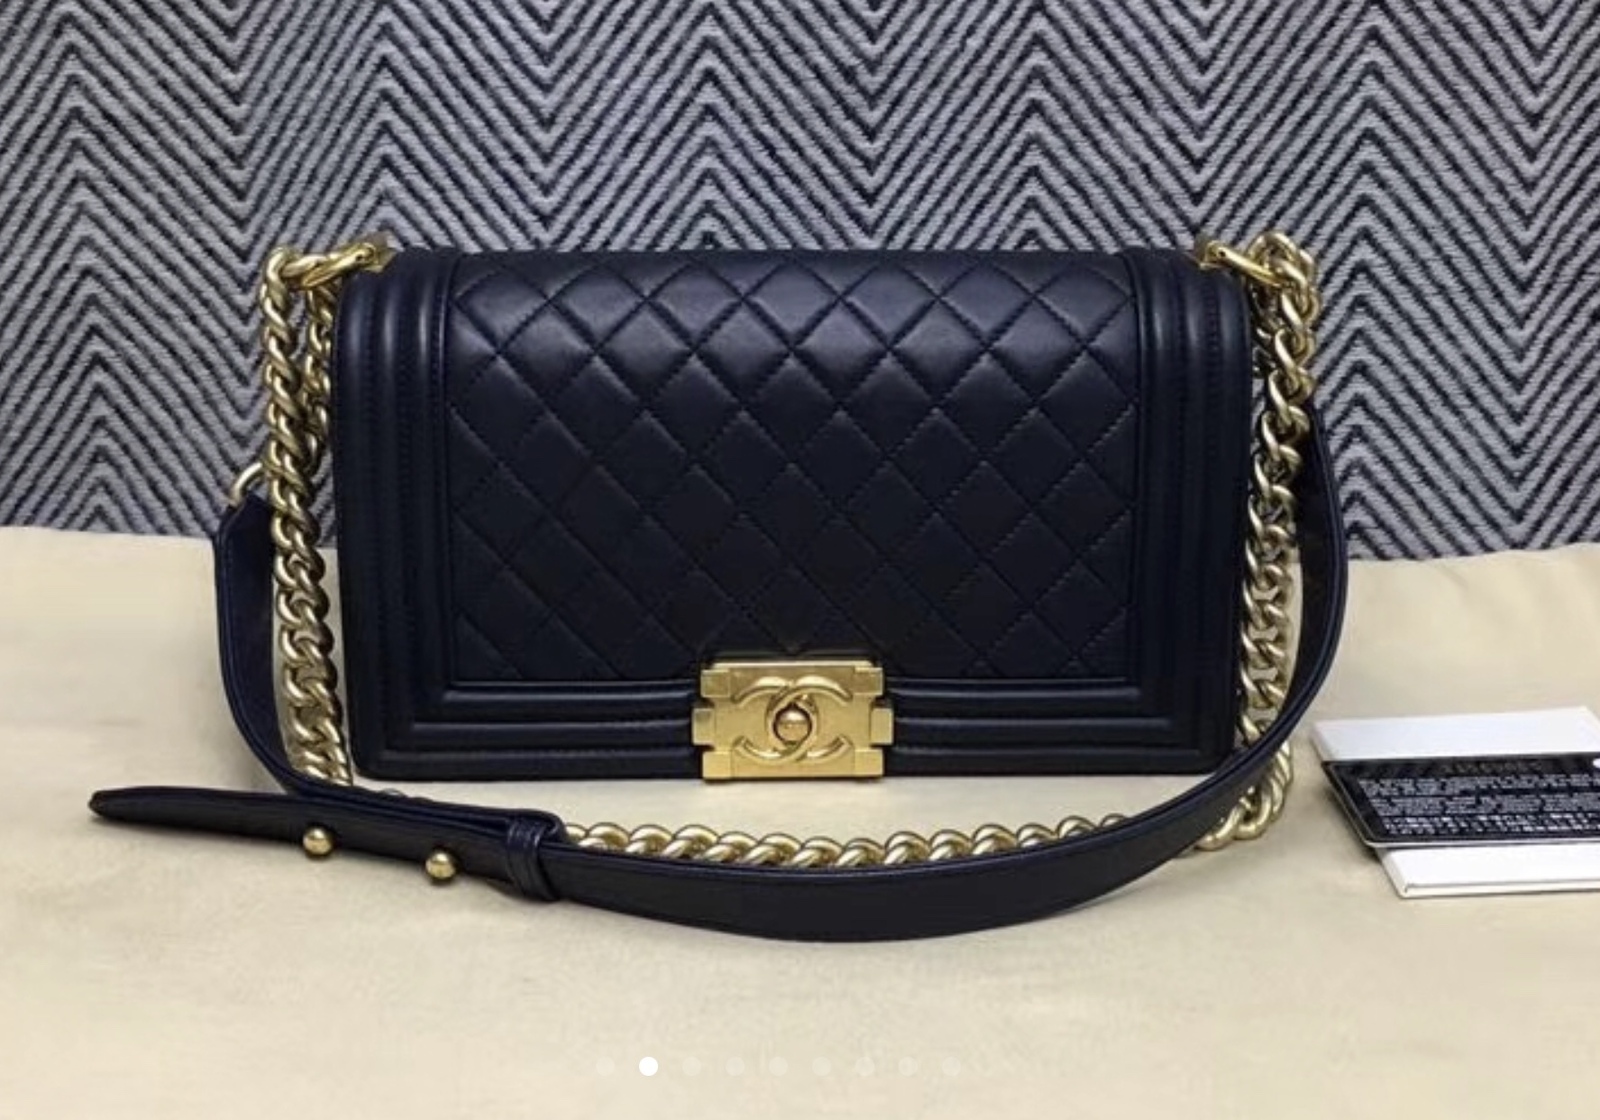 100% AUTHENTIC CHANEL NAVY BLUE QUILTED LAMBSKIN MEDIUM BOY FLAP BAG ...